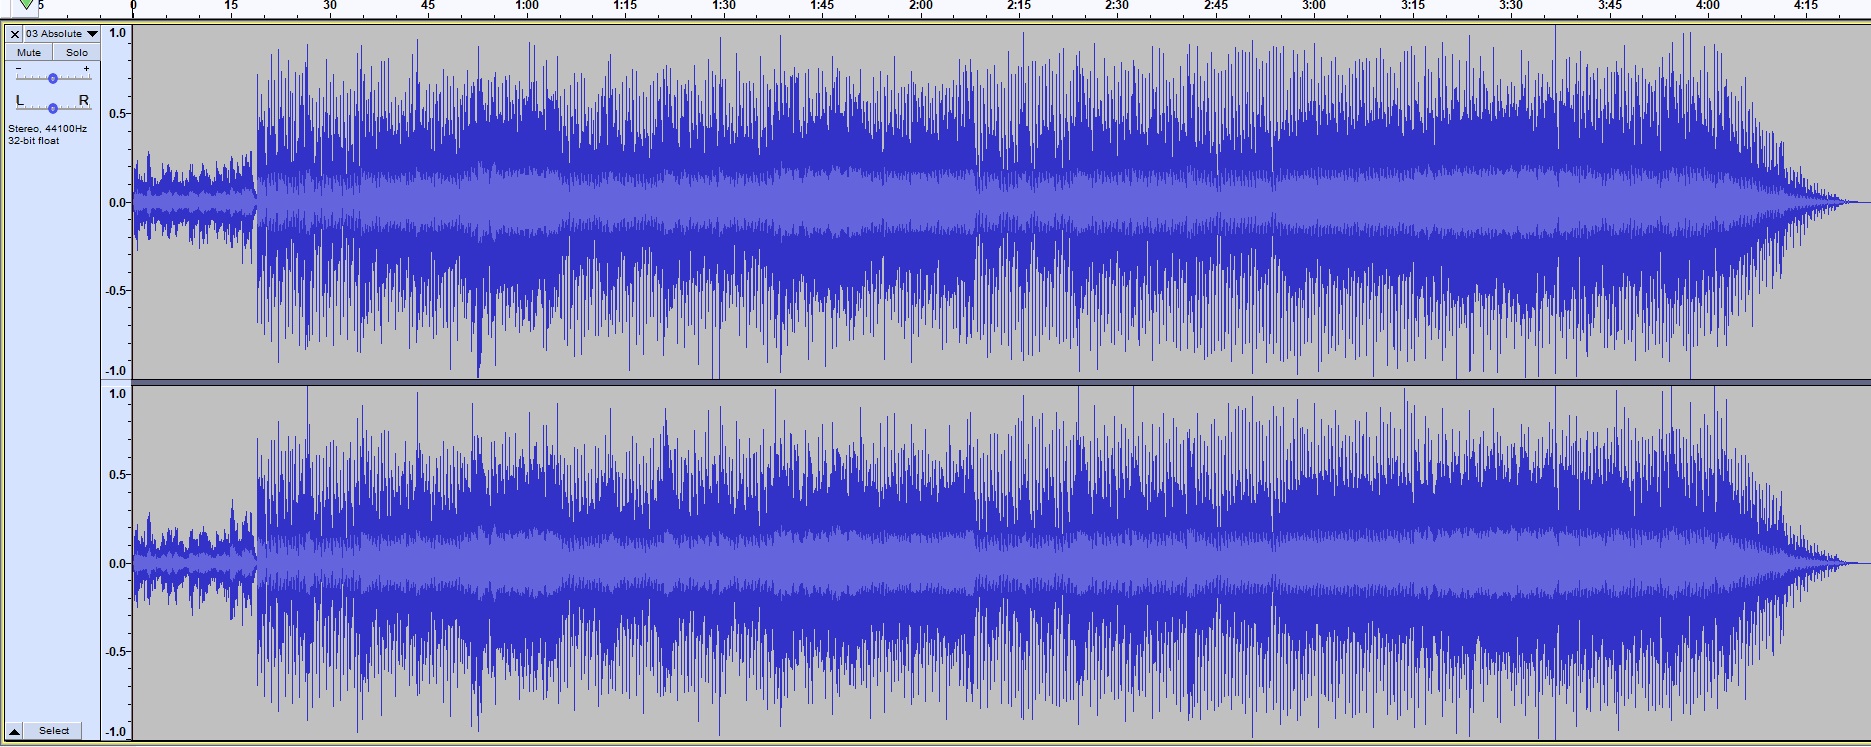 WAV file display in Audacity for 'Absolute' from original UK CD edition